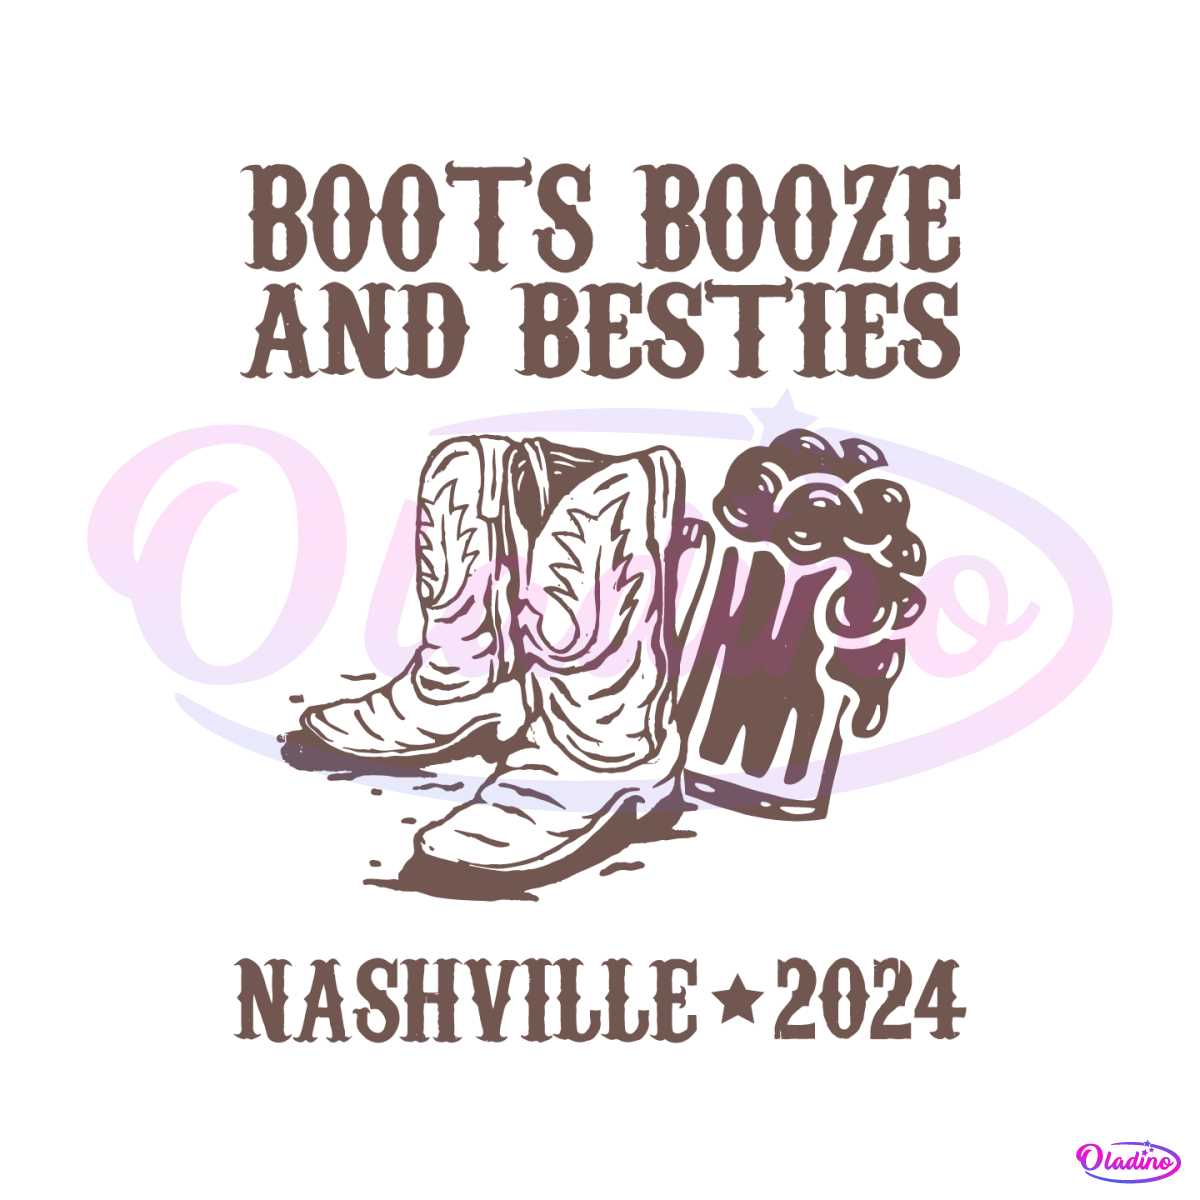 vintage-boots-booze-and-besties-svg